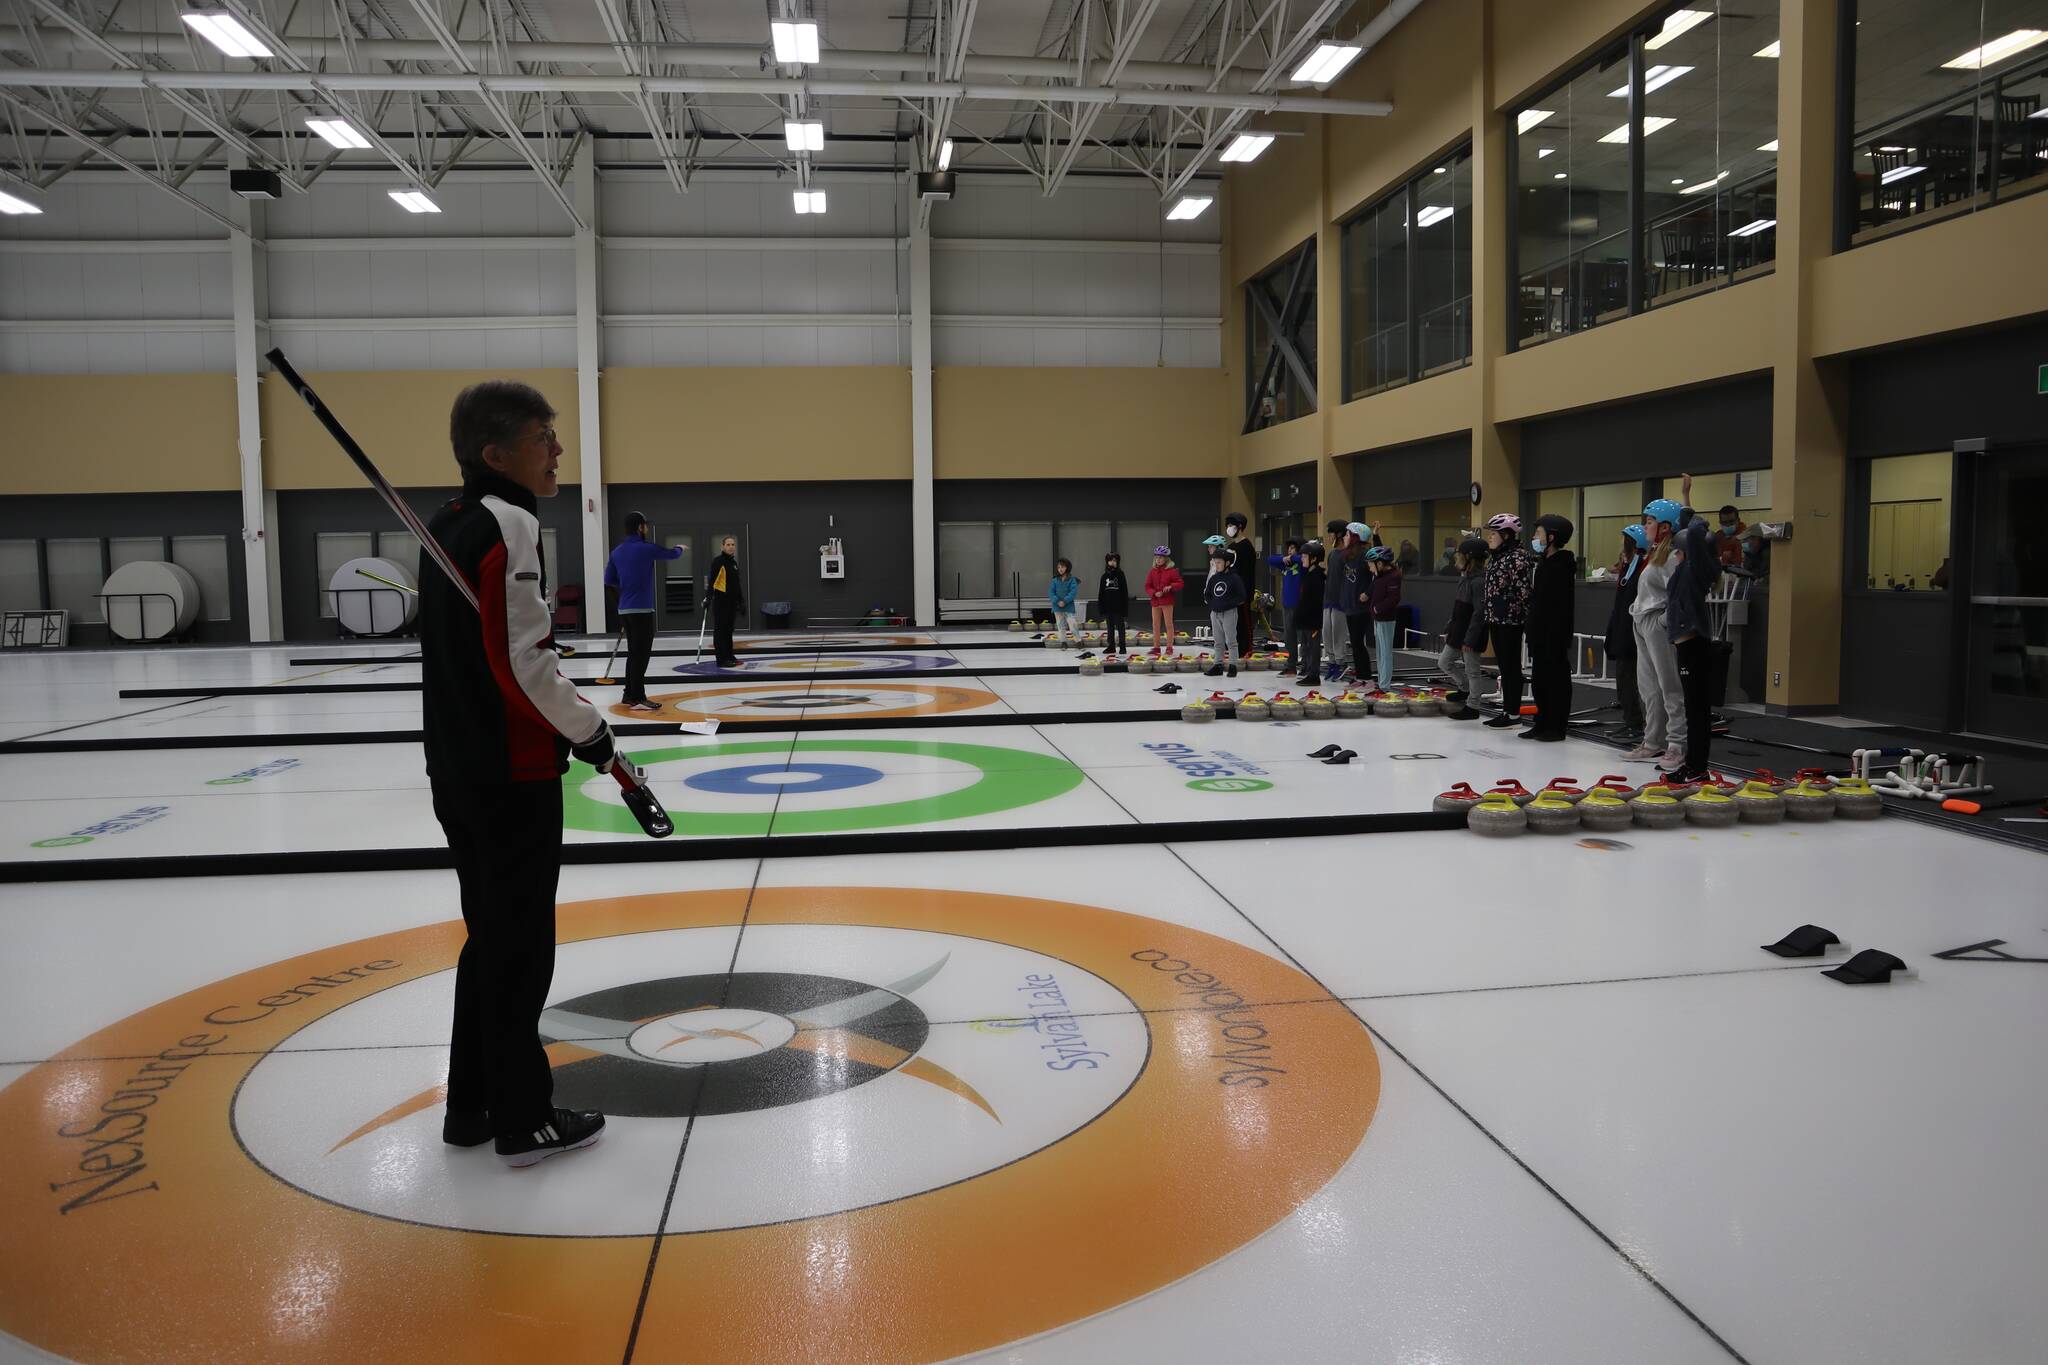 27177529_web1_211118-SLN-Youth-Curling-free-event_4